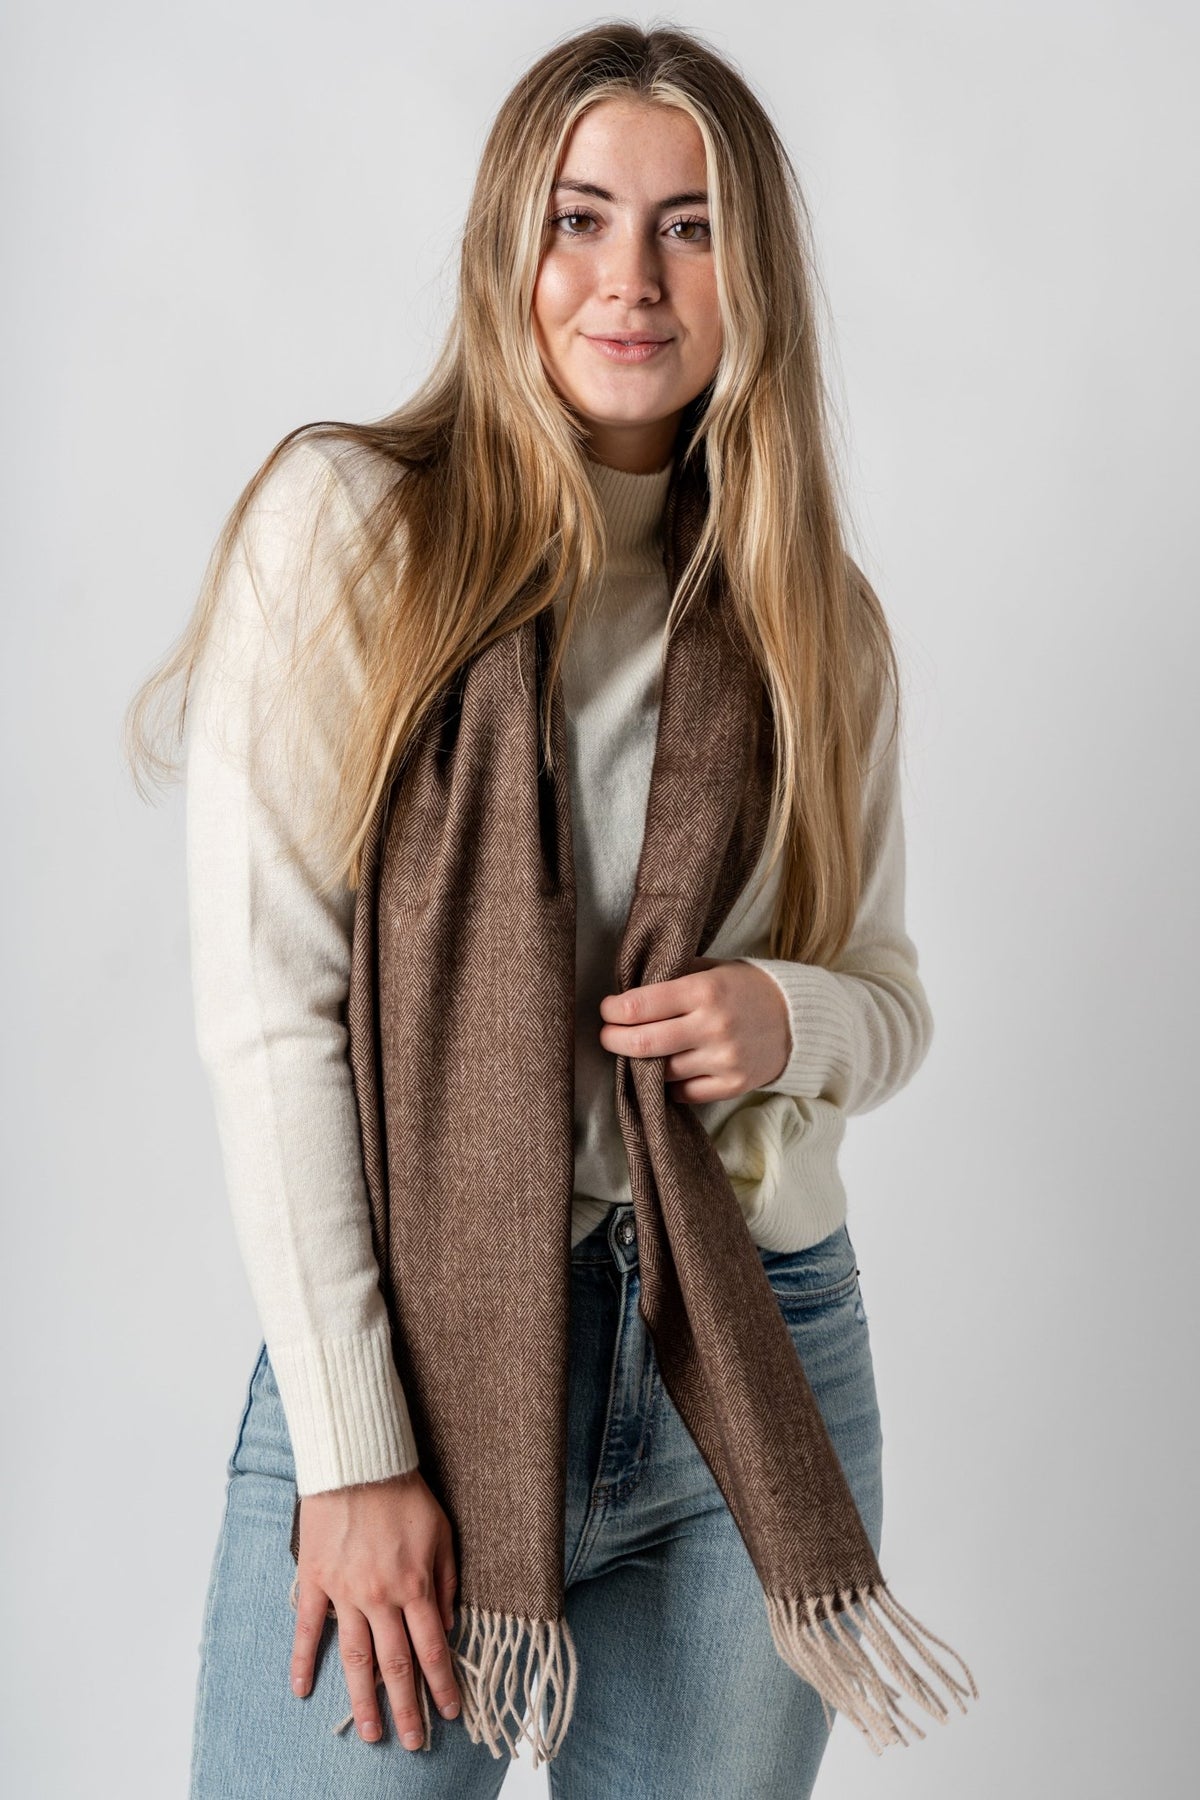 Herringbone muffler classic scarf brown - Trendy Gifts at Lush Fashion Lounge Boutique in Oklahoma City